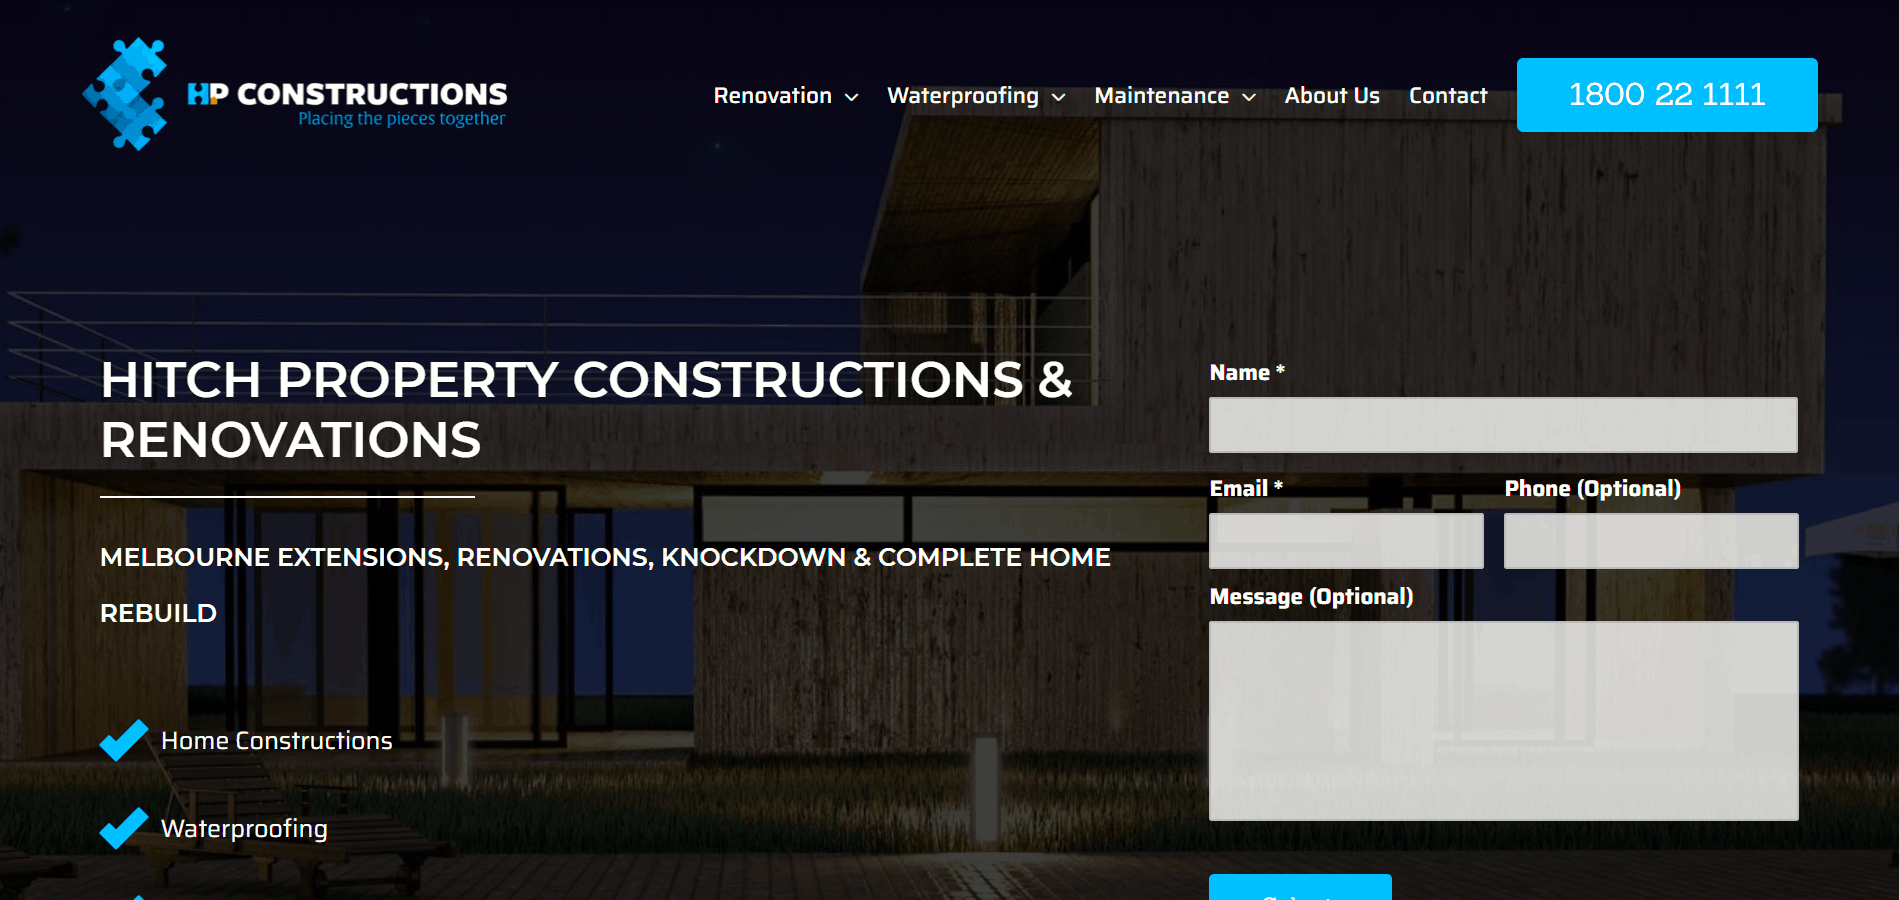 Hitch Property Constructions 2